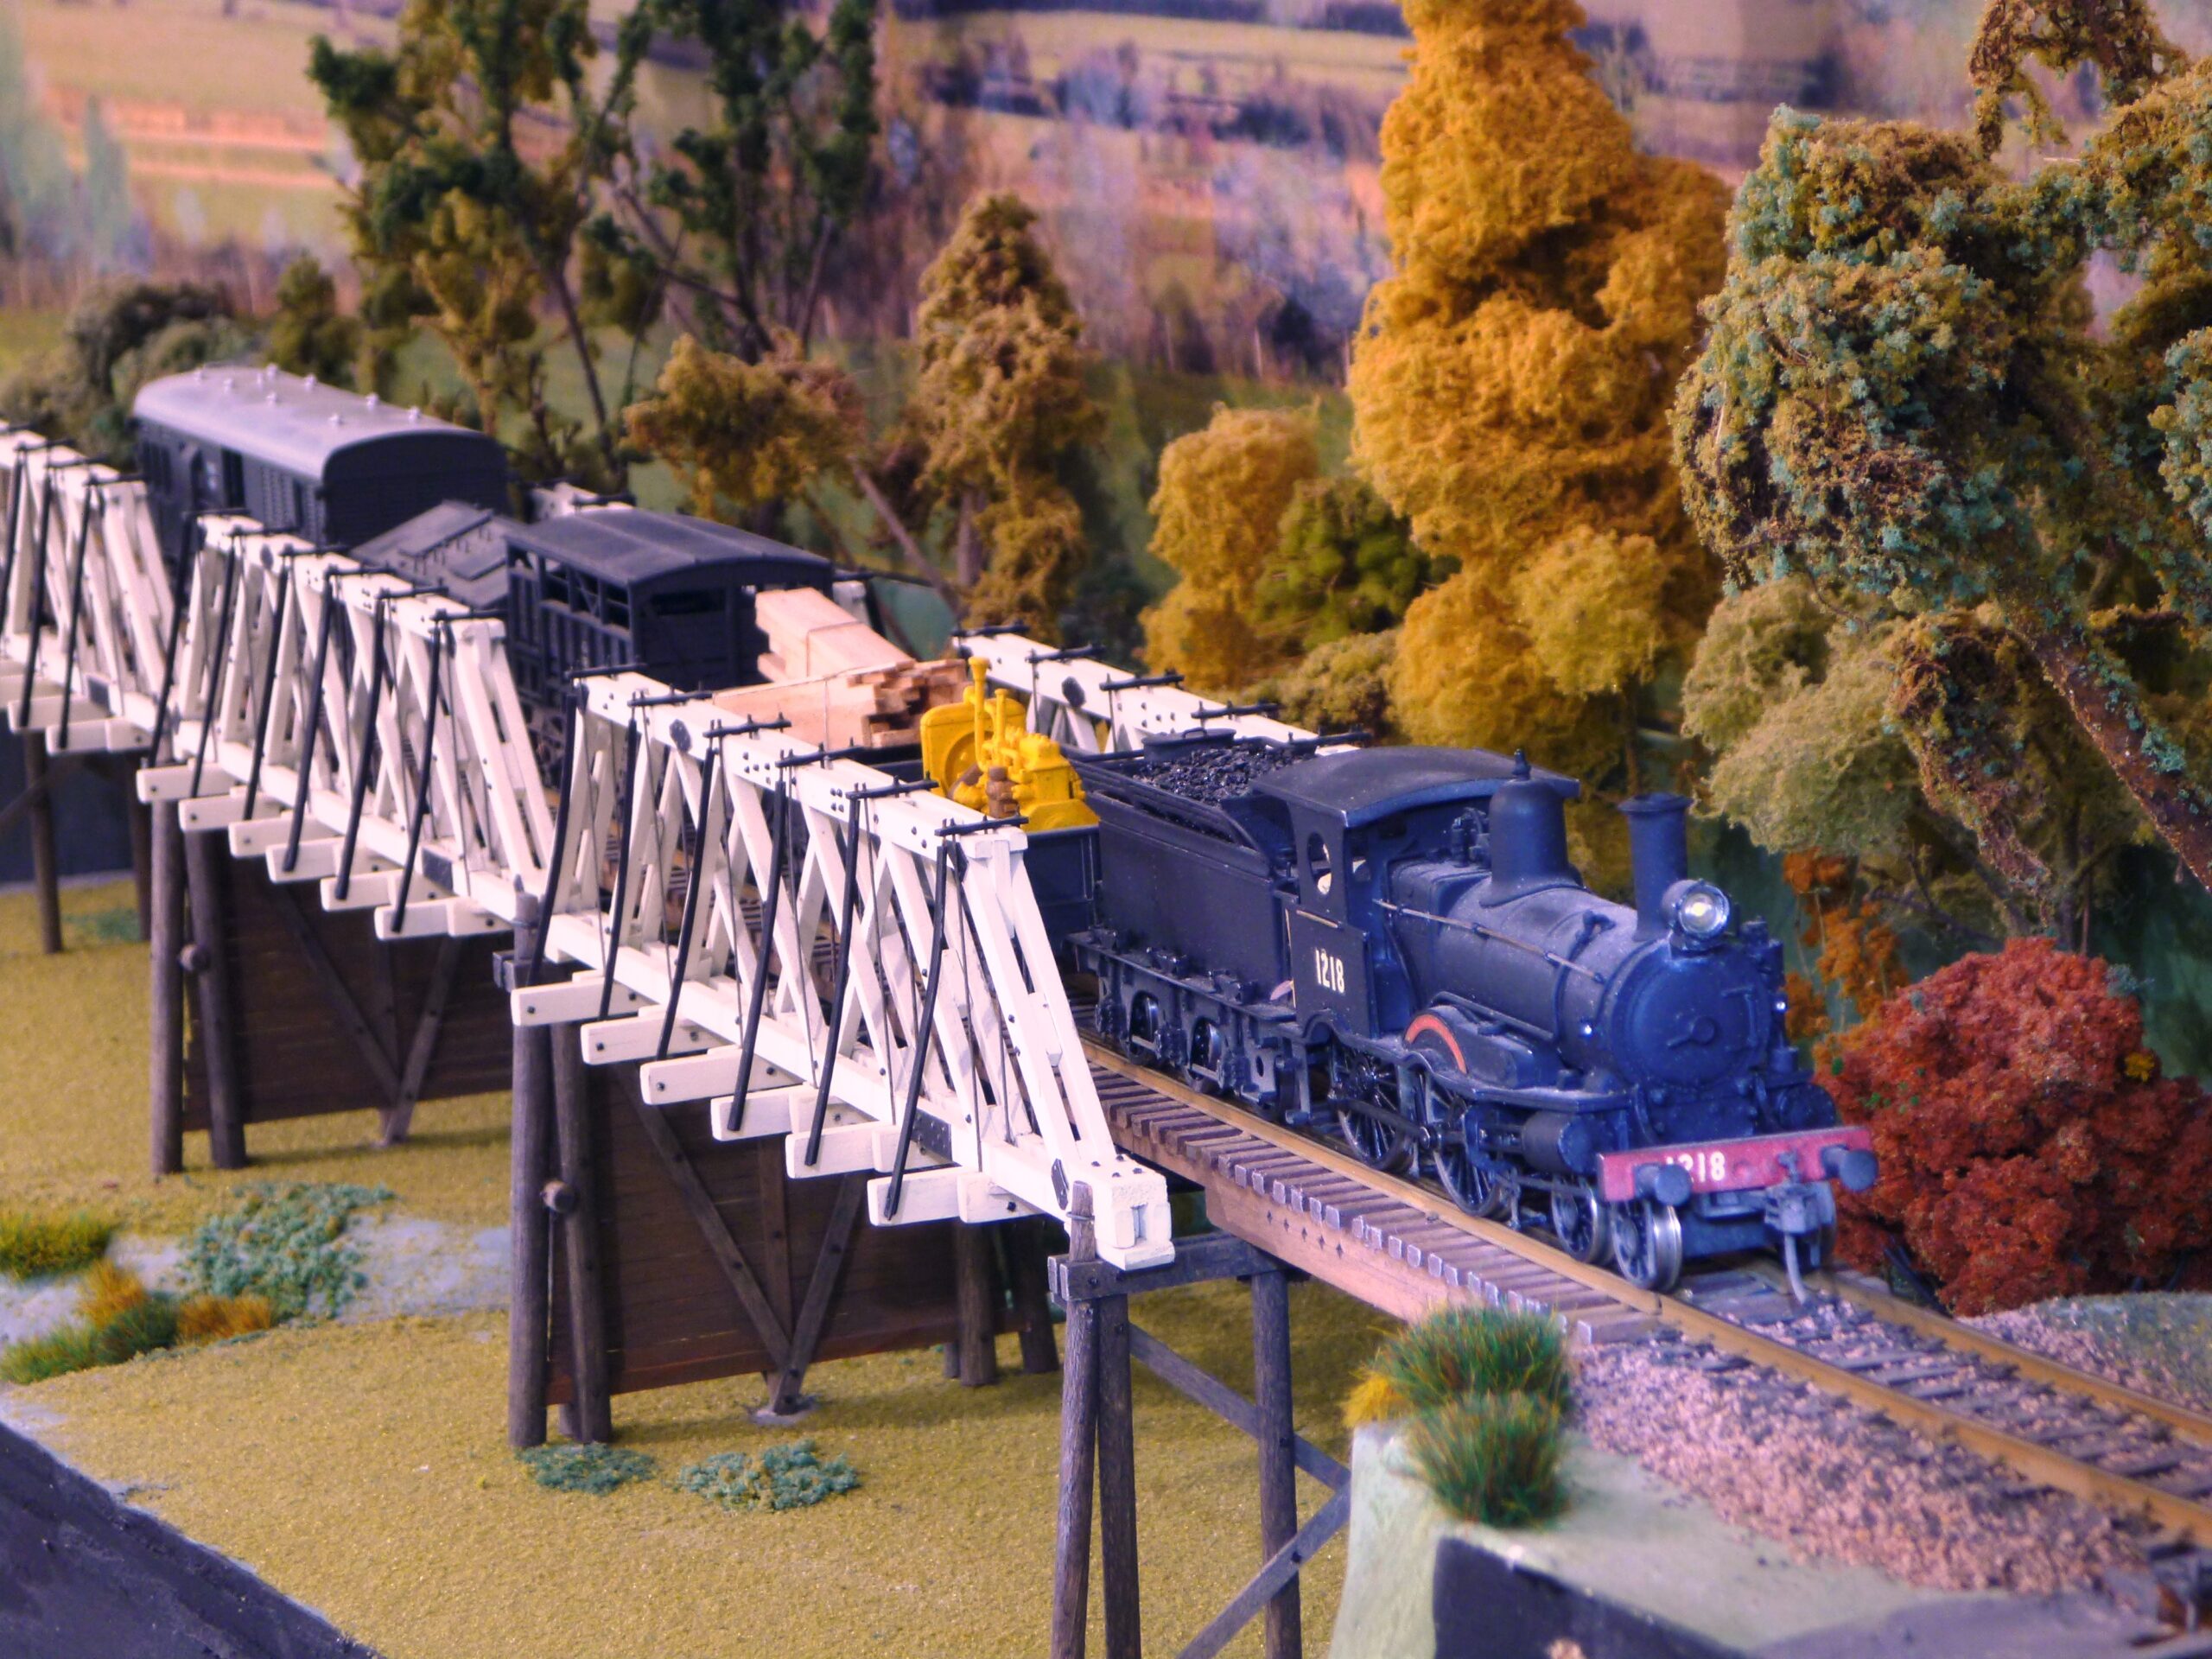 The Daily Mixed Goods trundles across Farout Creek – Ian Barnes|NMRA Photo Gallery